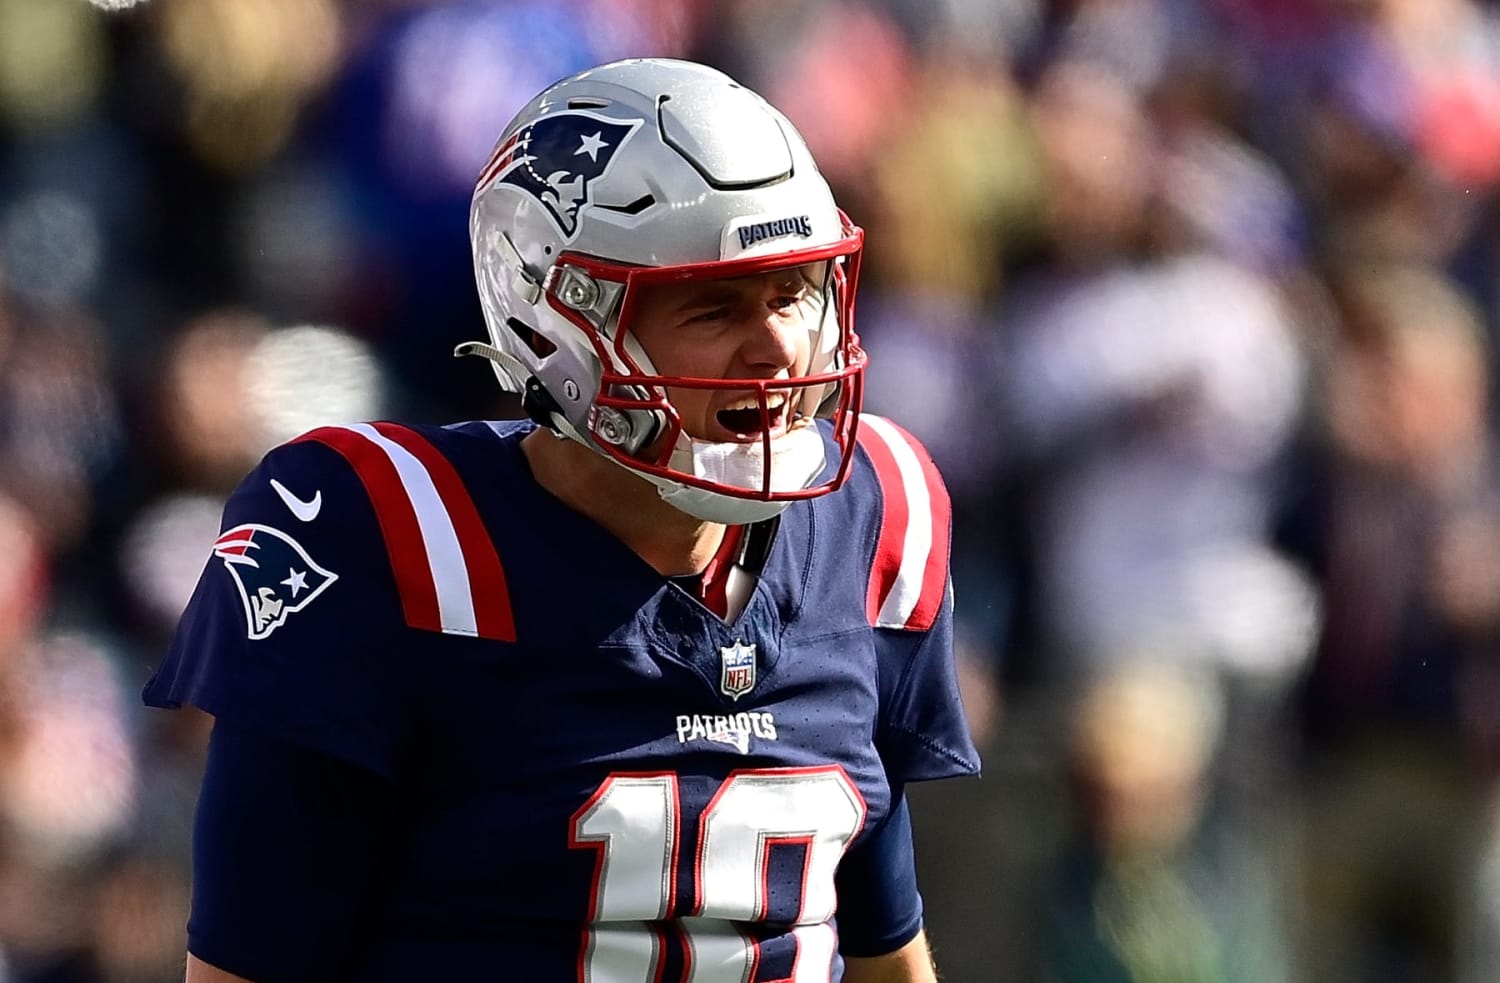 13 historical connections for the Patriots' new jersey numbers - Pats Pulpit